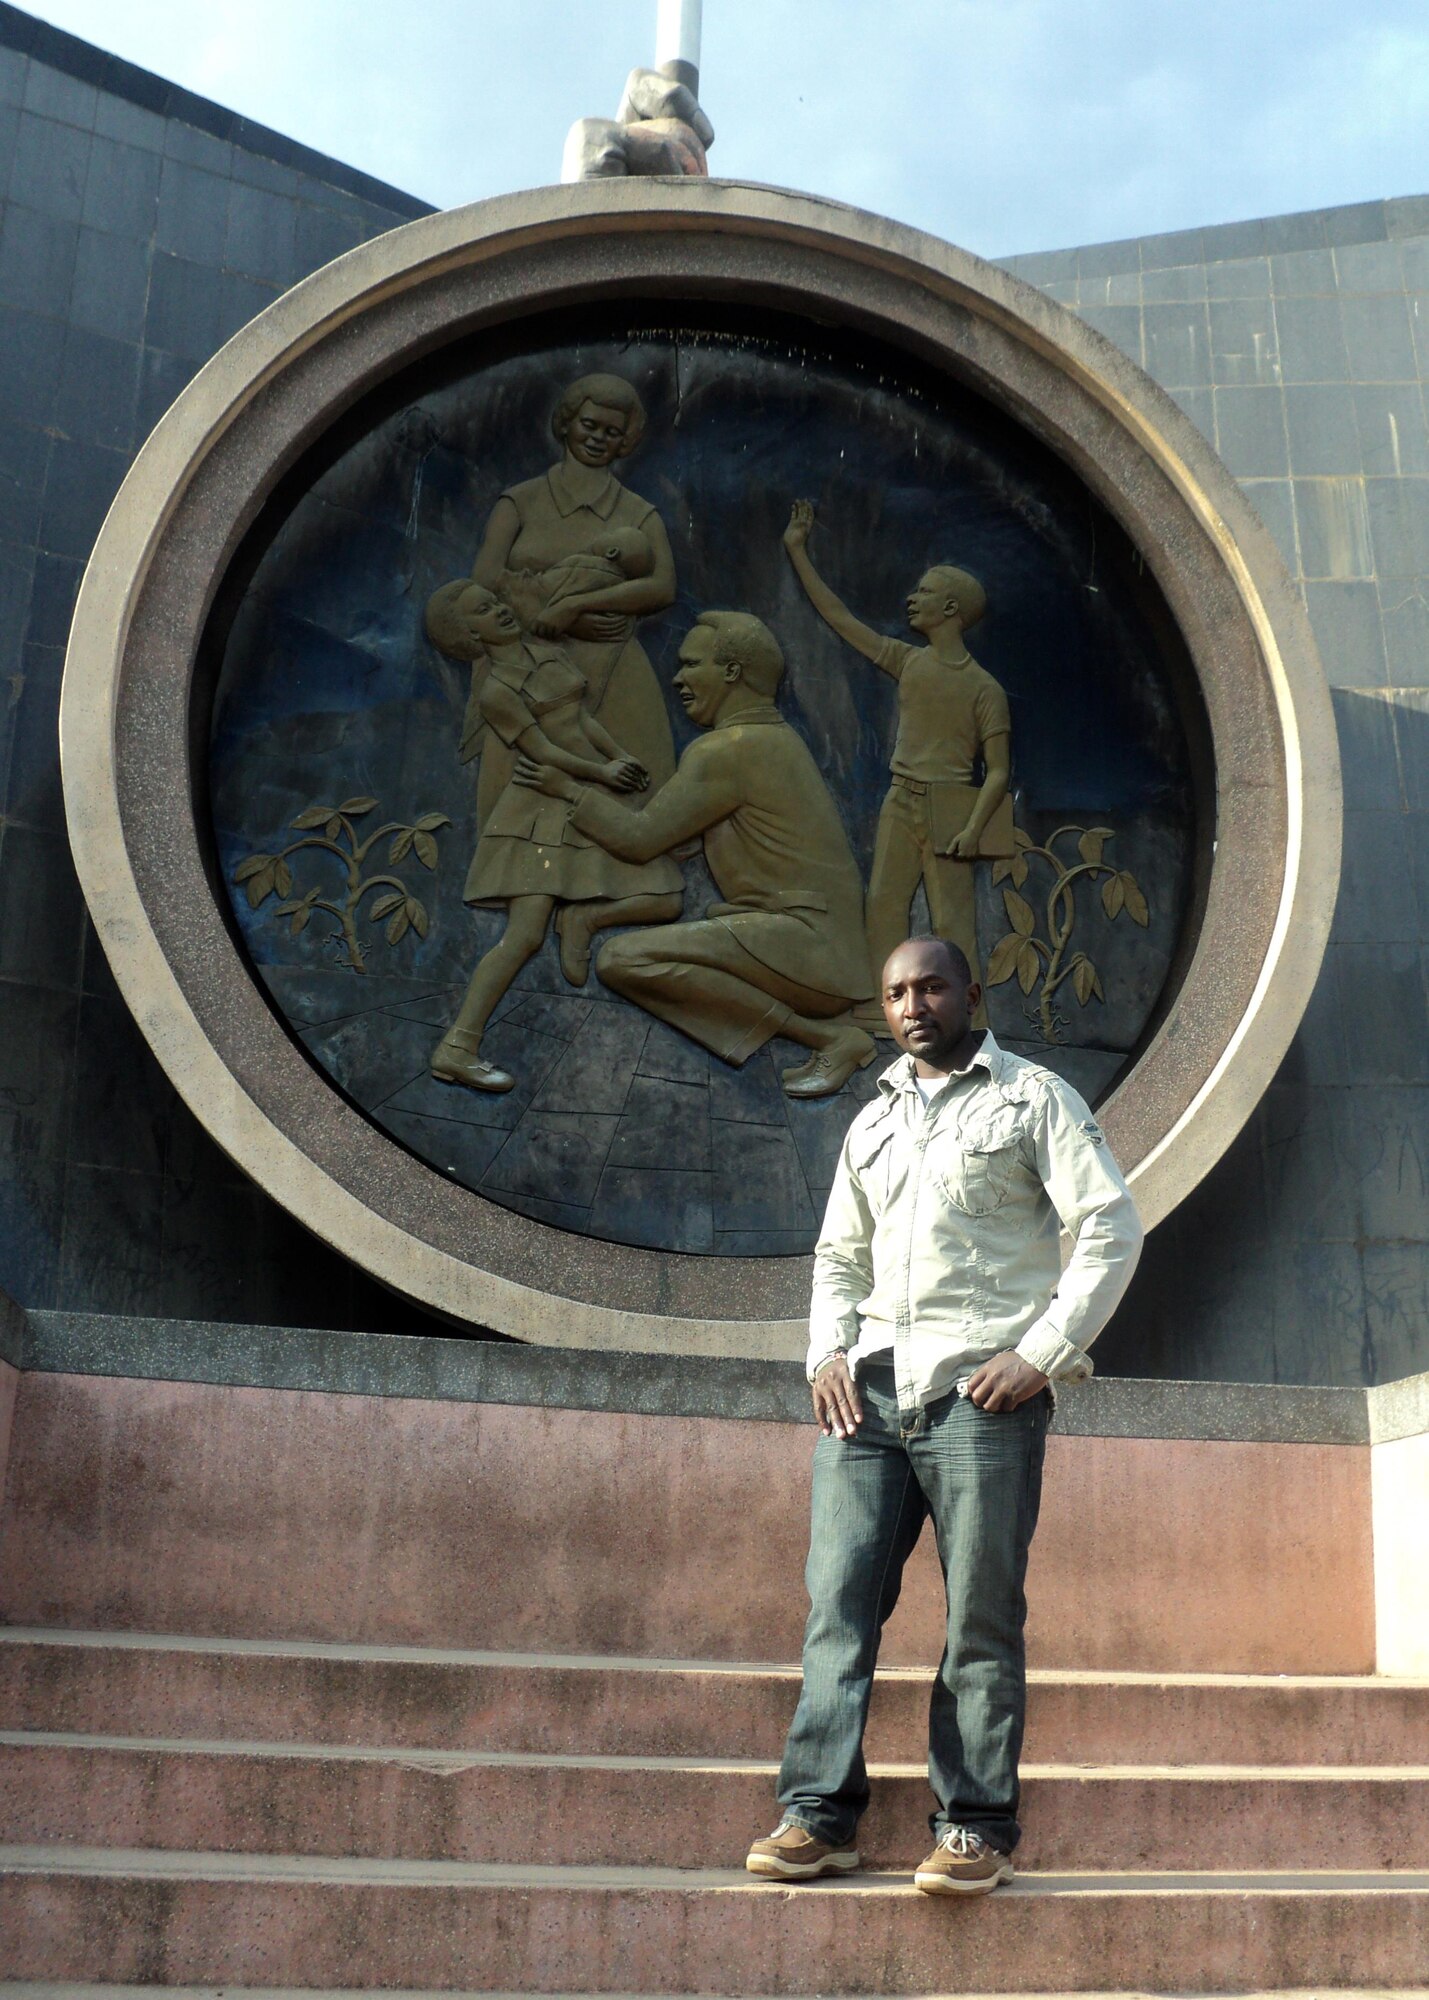 Staff Sgt. Johnson Njenga, a Kenya native, stands in front of the Nyayo-era Monument in Central Park in Nairobi, Kenya, during a past visit home. Njenga is the 21st Medical Squadron Family Health NCO in charge at Schriever Air Force Base, Colo. (Courtesy photo)